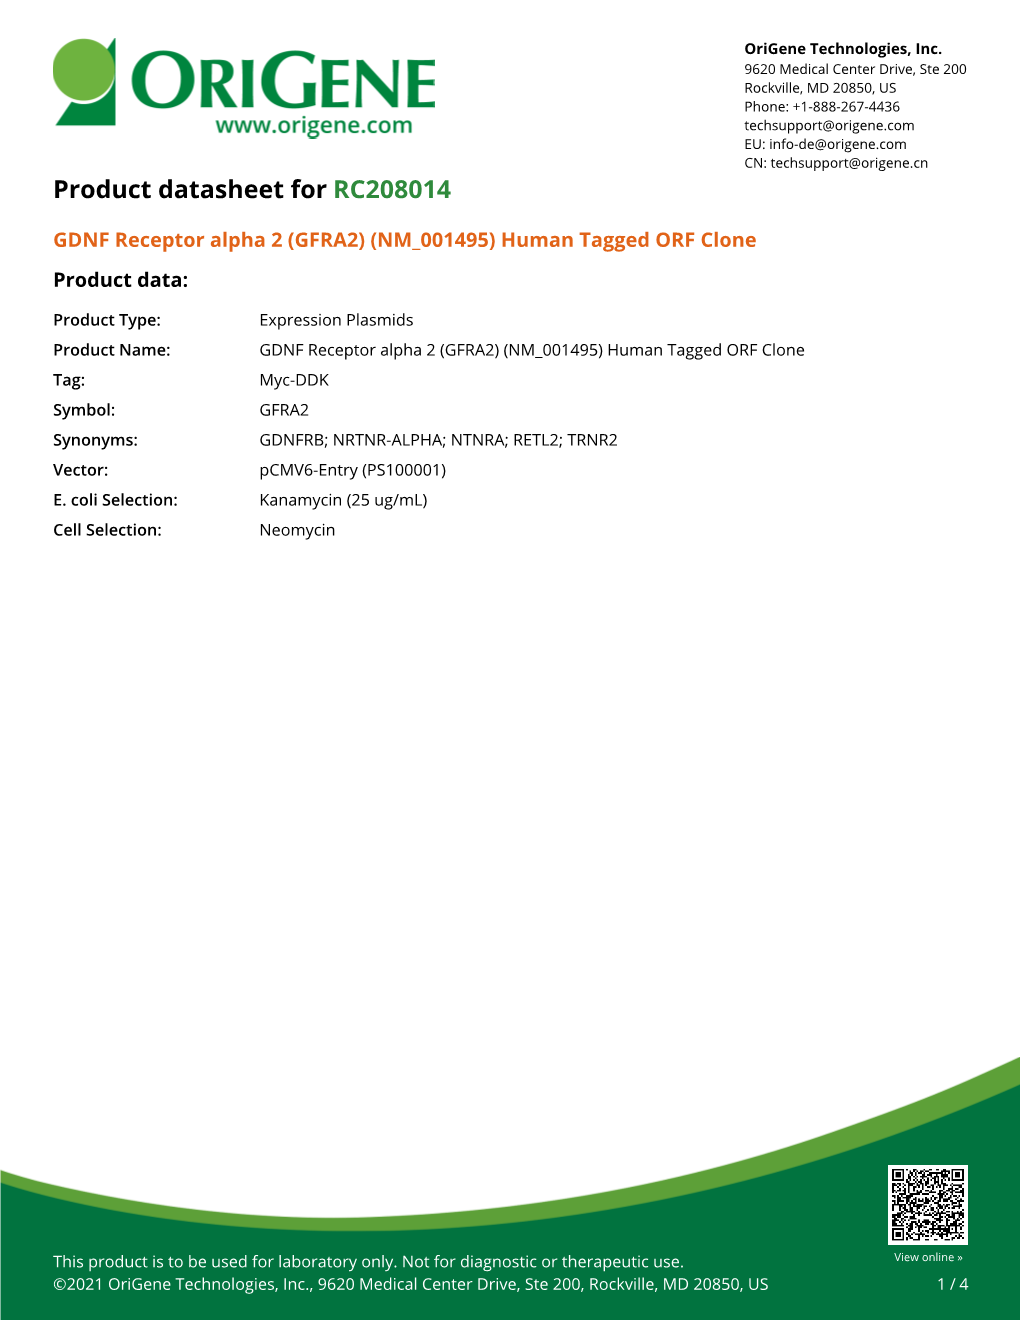 GDNF Receptor Alpha 2 (GFRA2) (NM 001495) Human Tagged ORF Clone Product Data